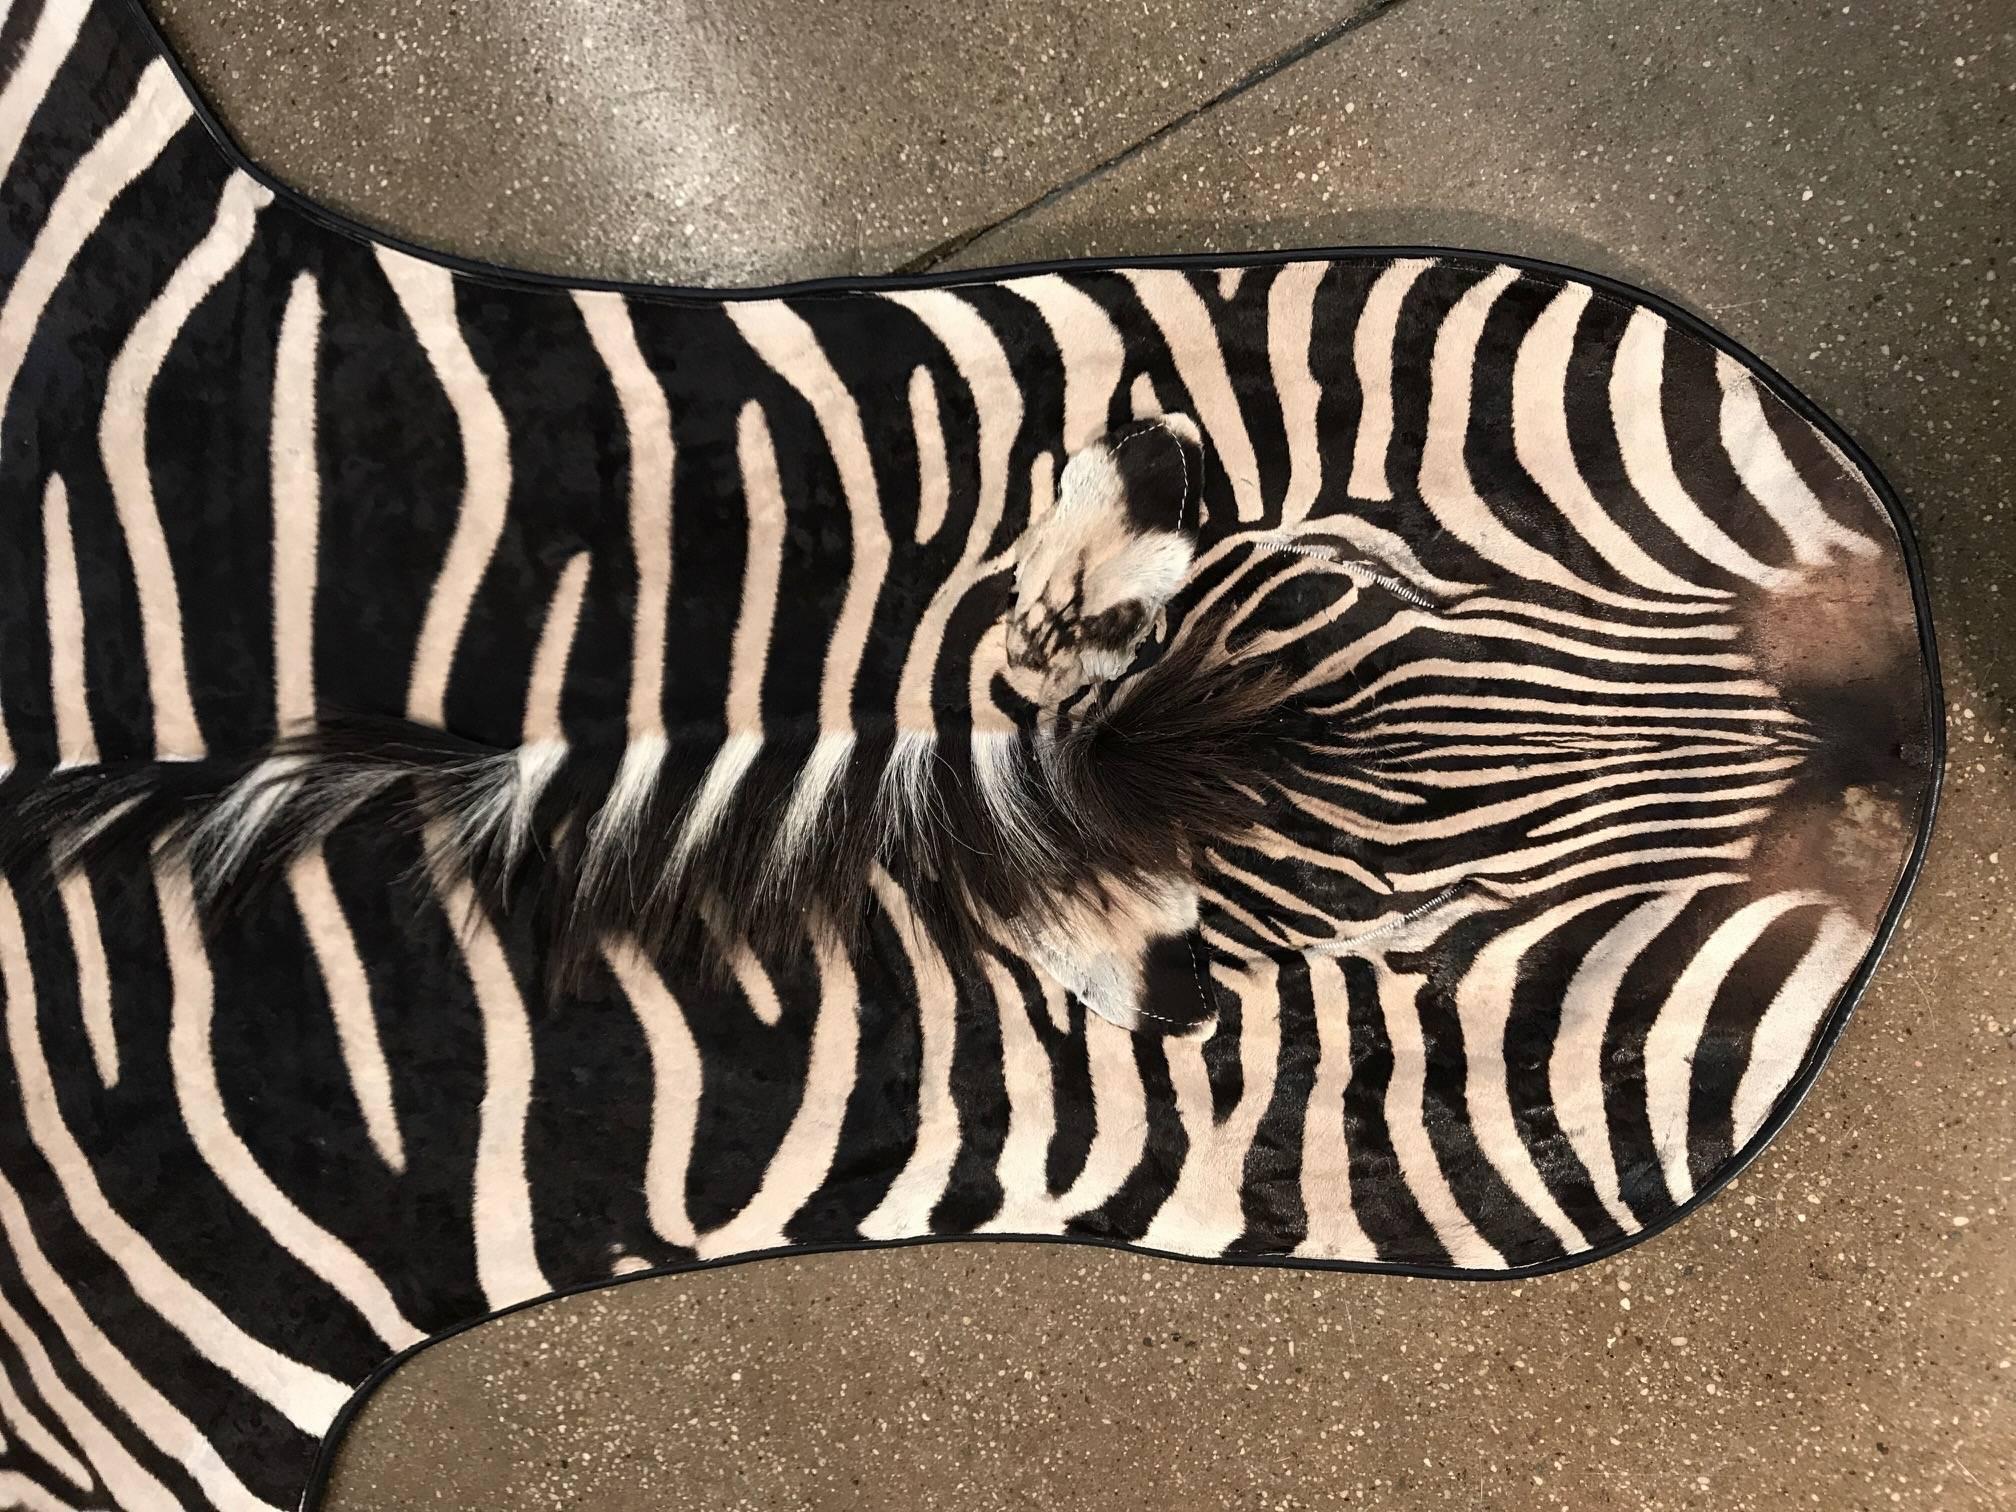 Beautiful grade “A” zebra skin rug lined with canvas and finished with leather trim
Measures: 9' x 5'2'' Long excluding the tail
Wide variety of hides in different sizes  



 